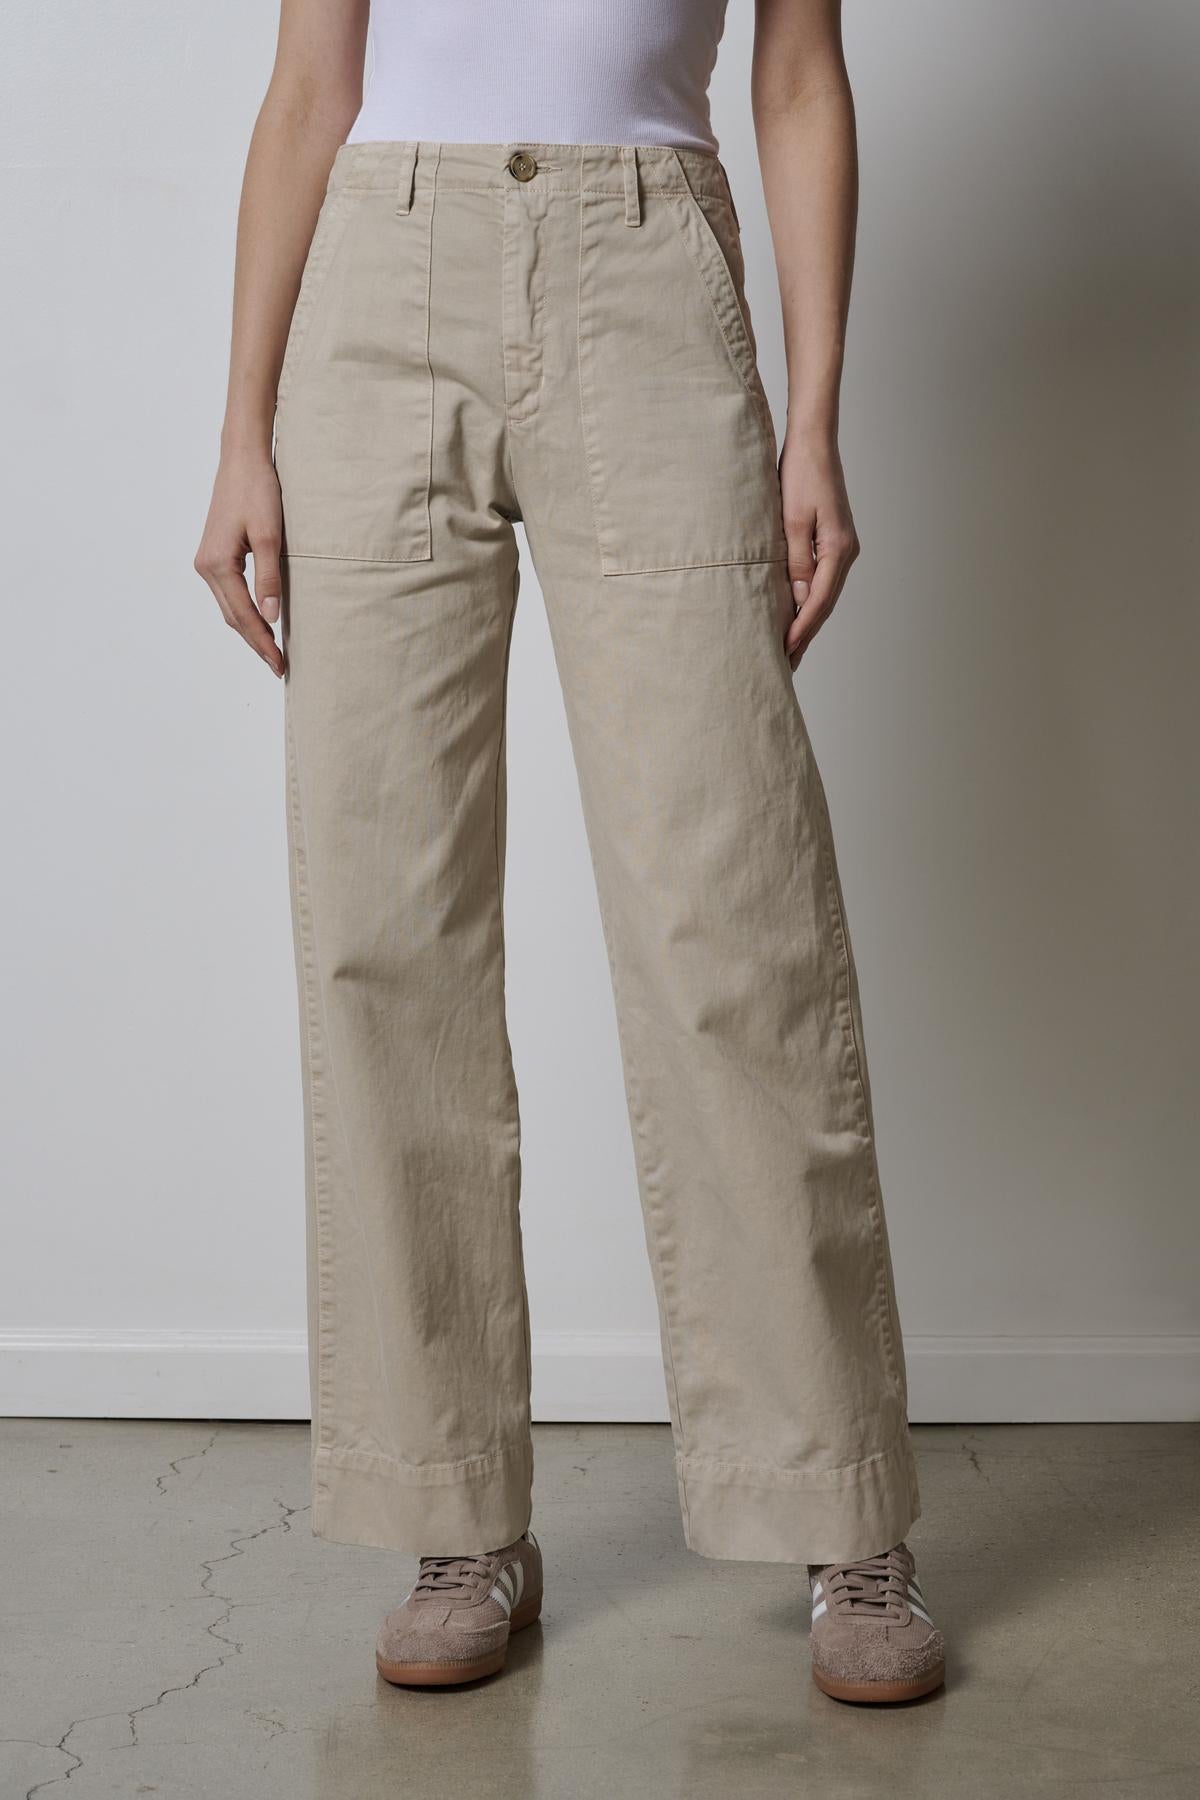 A woman wearing Velvet by Jenny Graham's VENTURA PANT in beige and a white top.-26827818434753